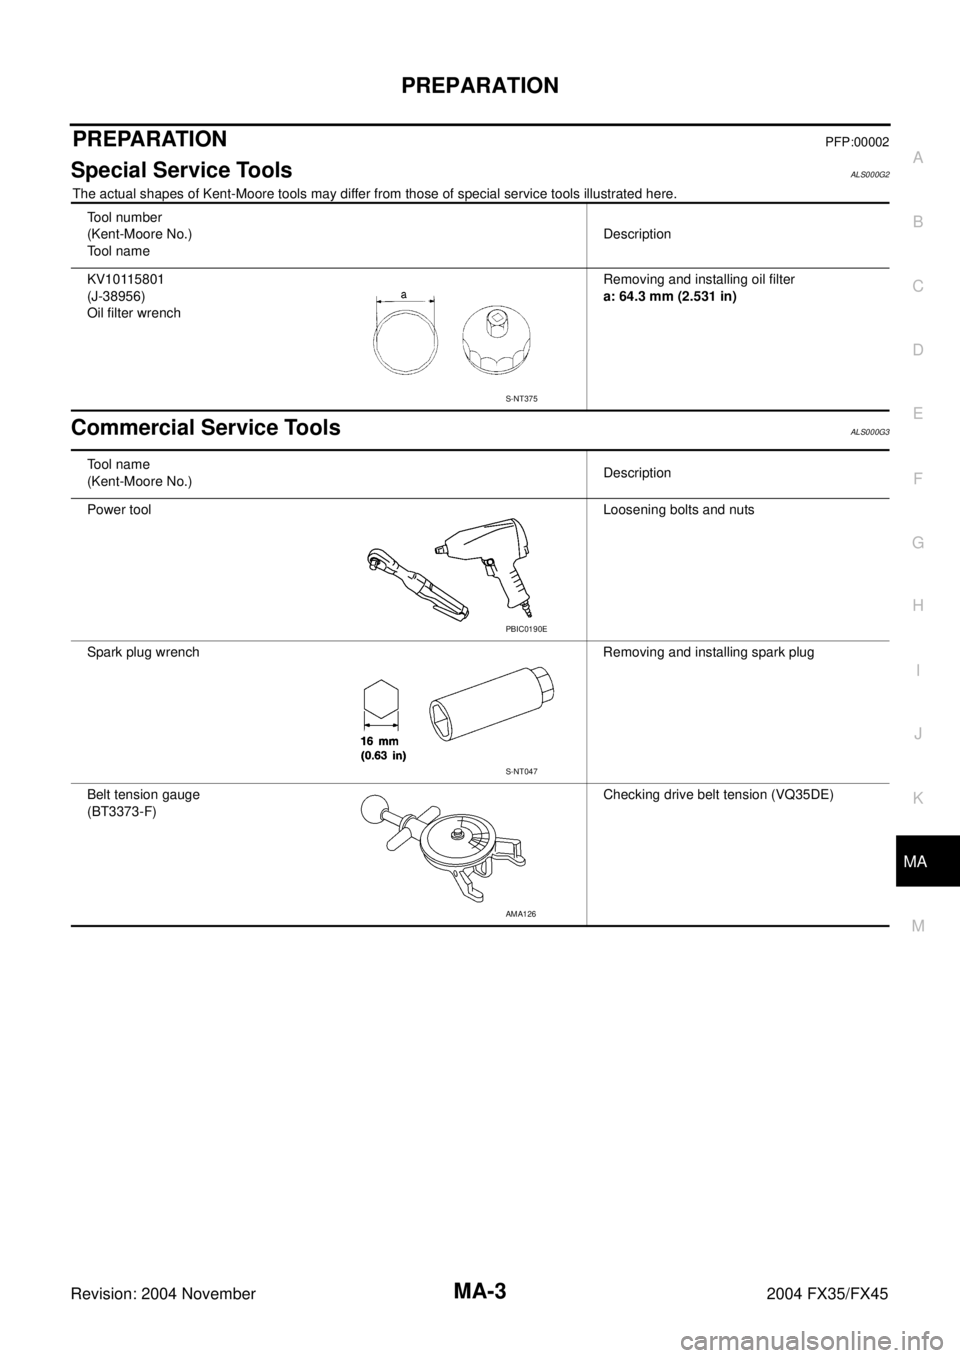 INFINITI FX35 2004  Service Manual PREPARATION
MA-3
C
D
E
F
G
H
I
J
K
MA
B
MA
Revision: 2004 November 2004 FX35/FX45
PREPARATIONPFP:00002
Special Service ToolsALS000G2
The actual shapes of Kent-Moore tools may differ from those of spec